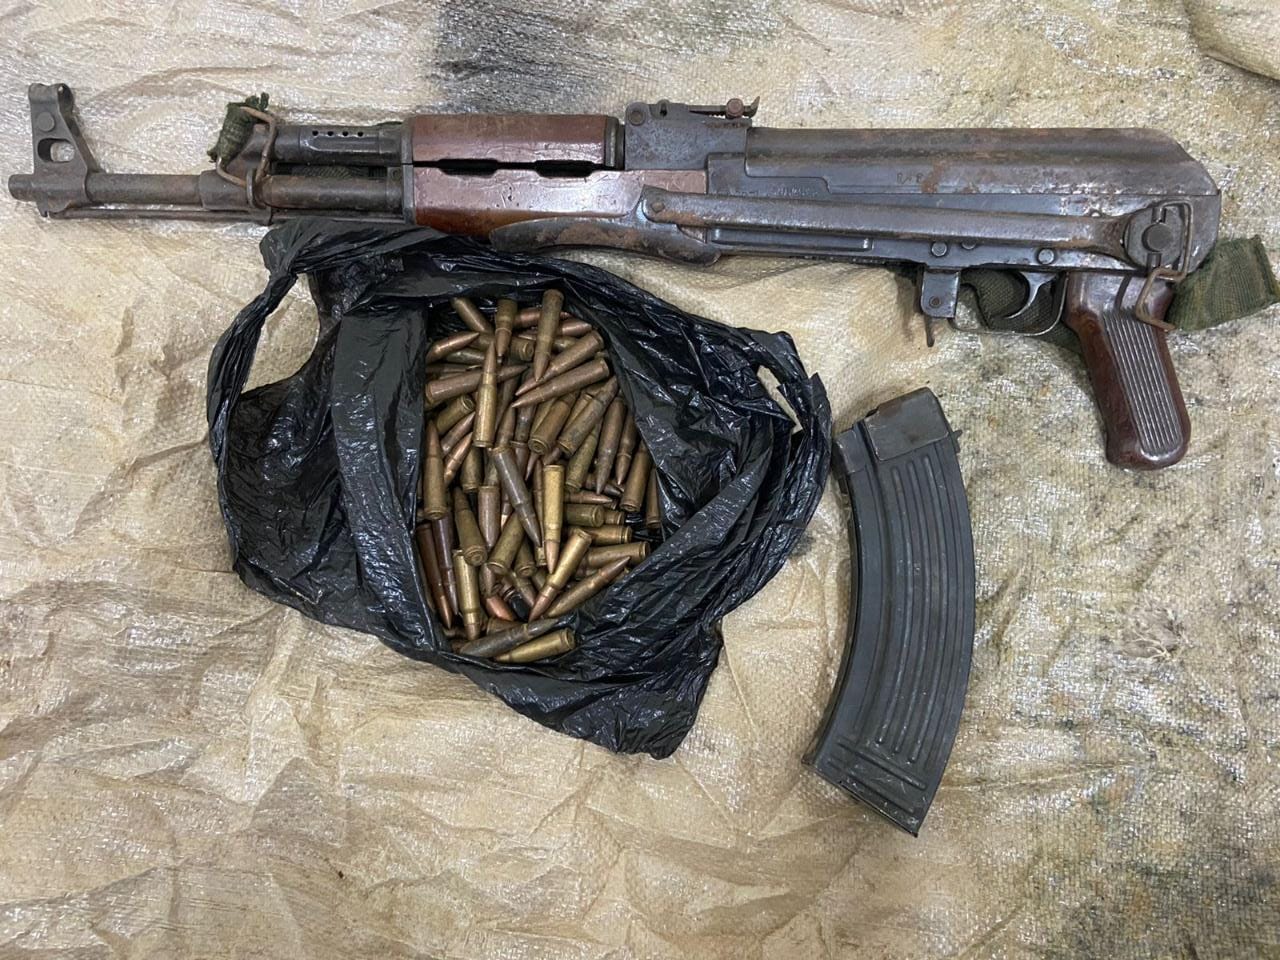 RPG attack case: Two more arrested by police, AK-56 rifle recovered